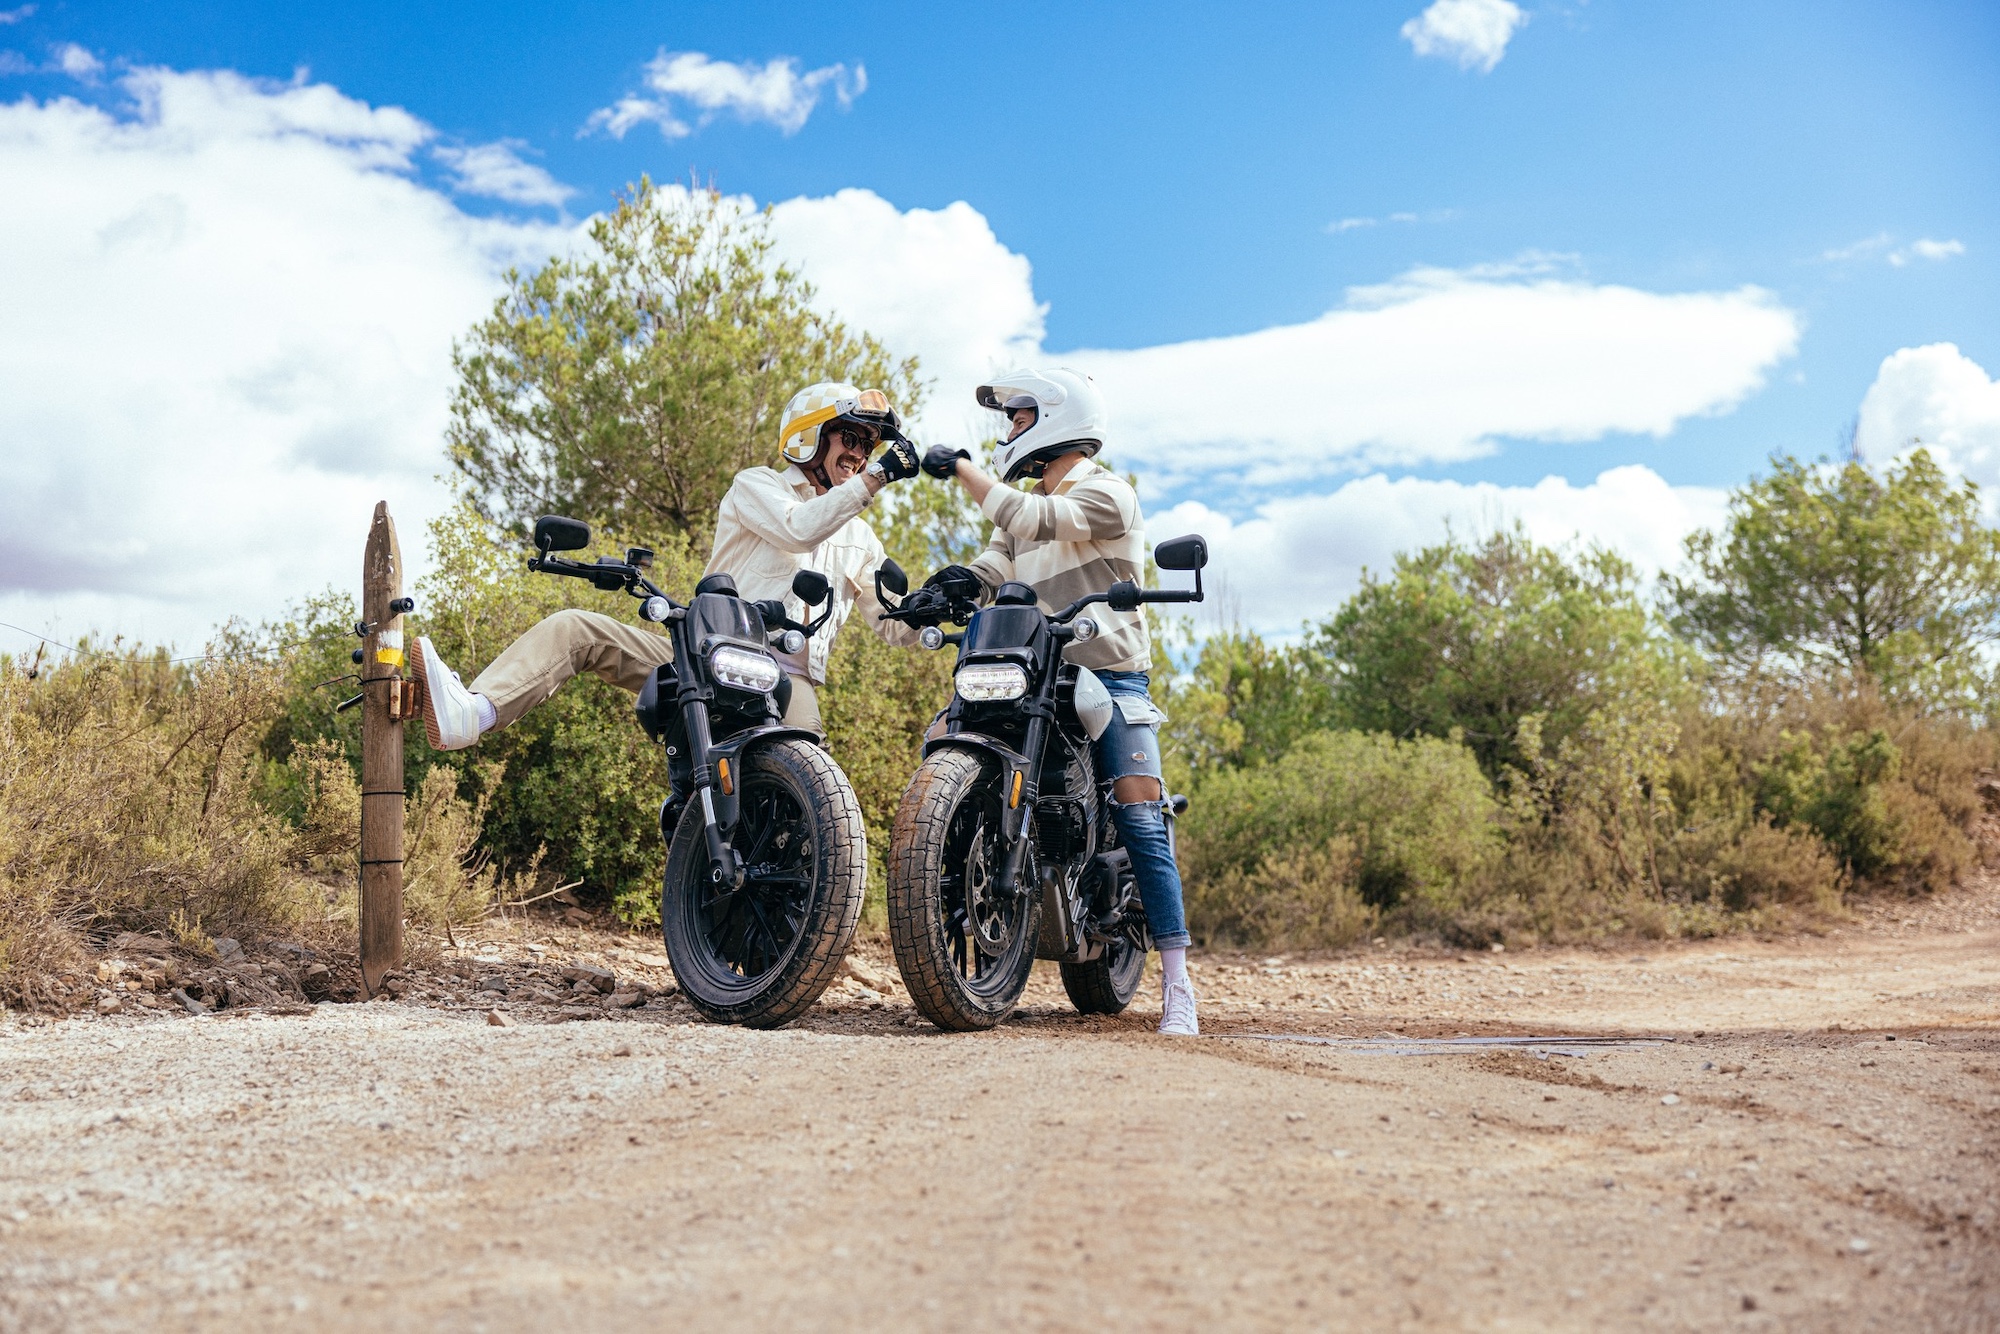 Two riders on electric motorcycles.